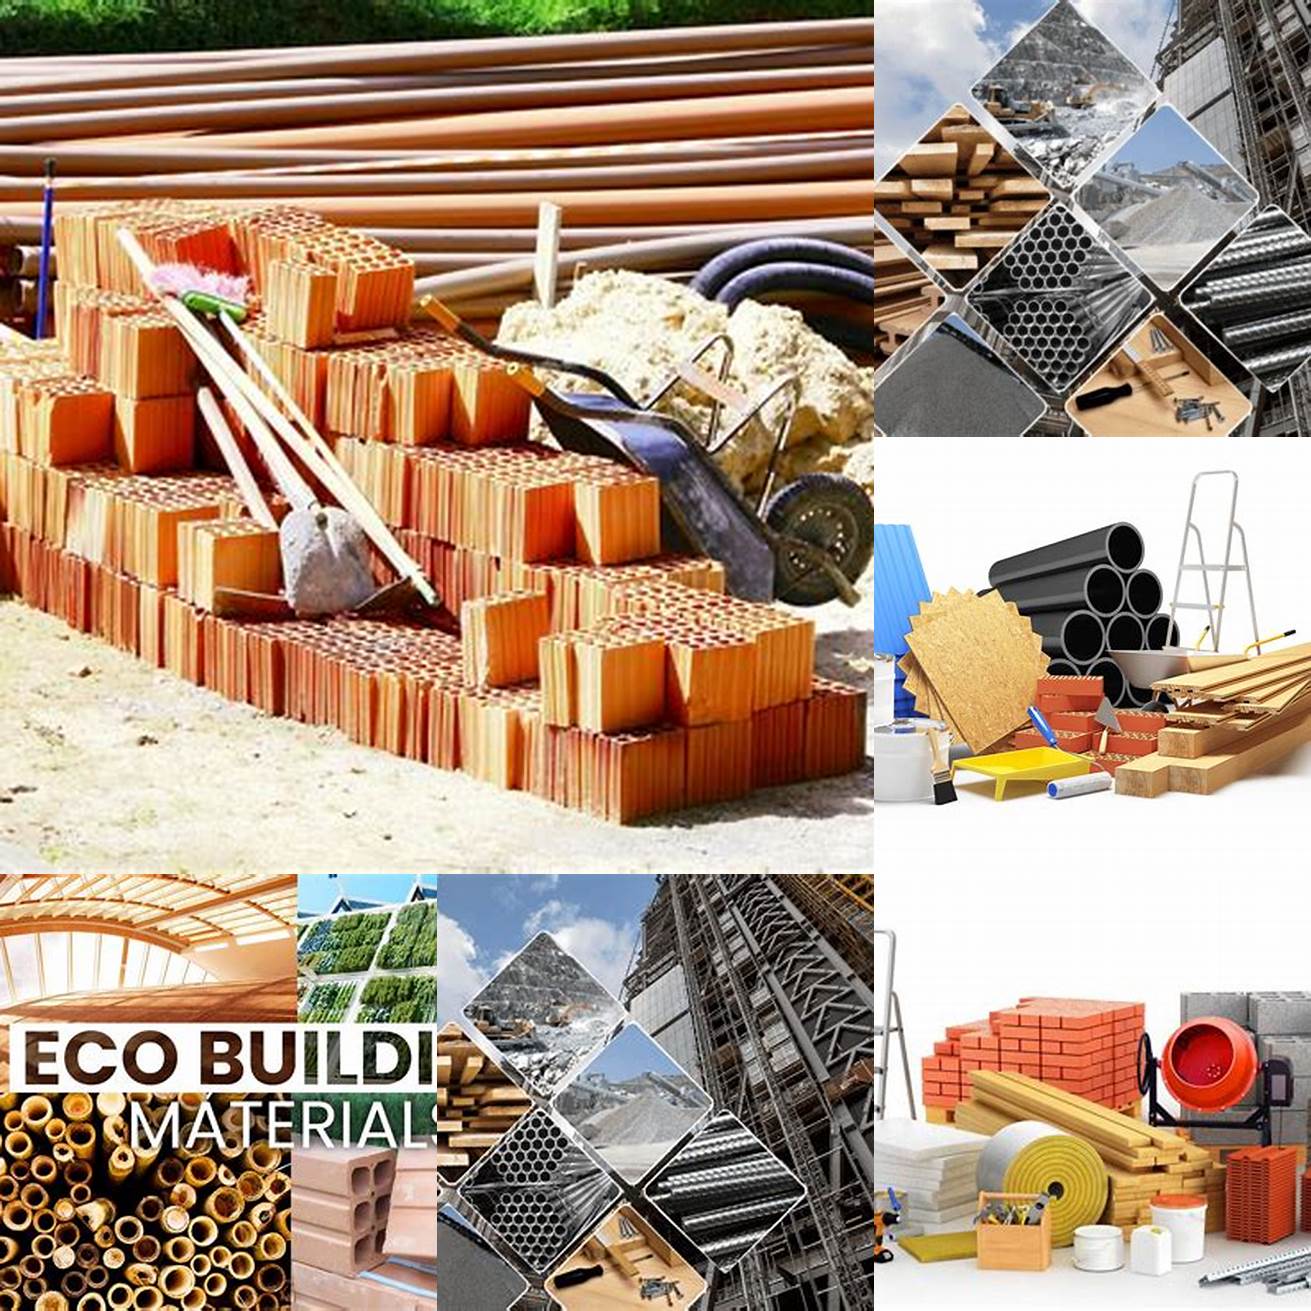 Choose high-quality materials and construction